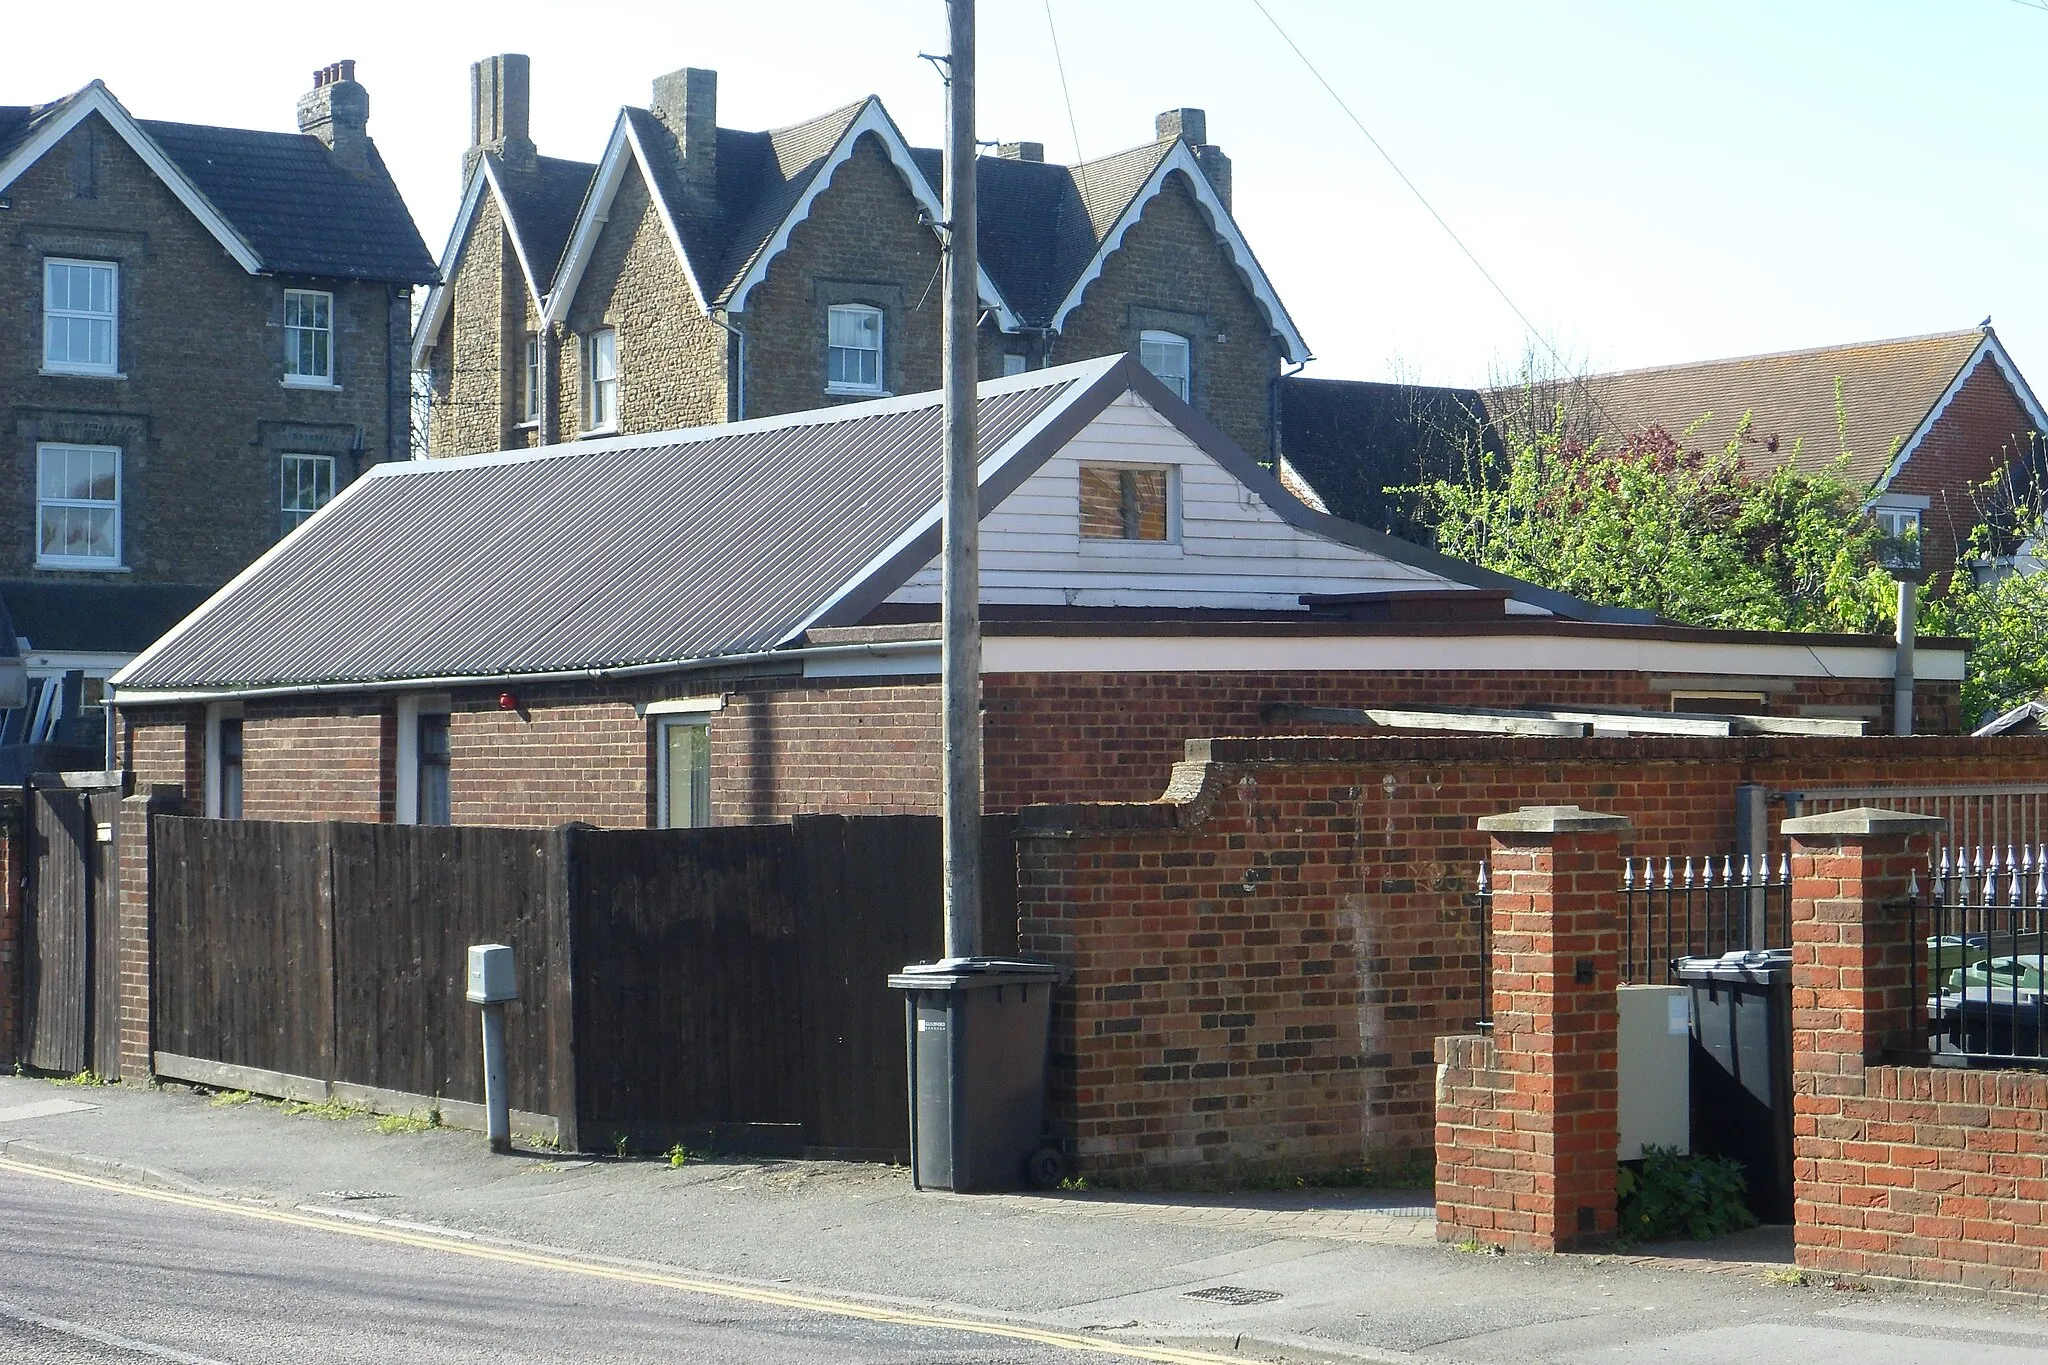 Photo showing: Guildford Synagogue, York Road, Guildford, Surrey, England, seen from the southeast